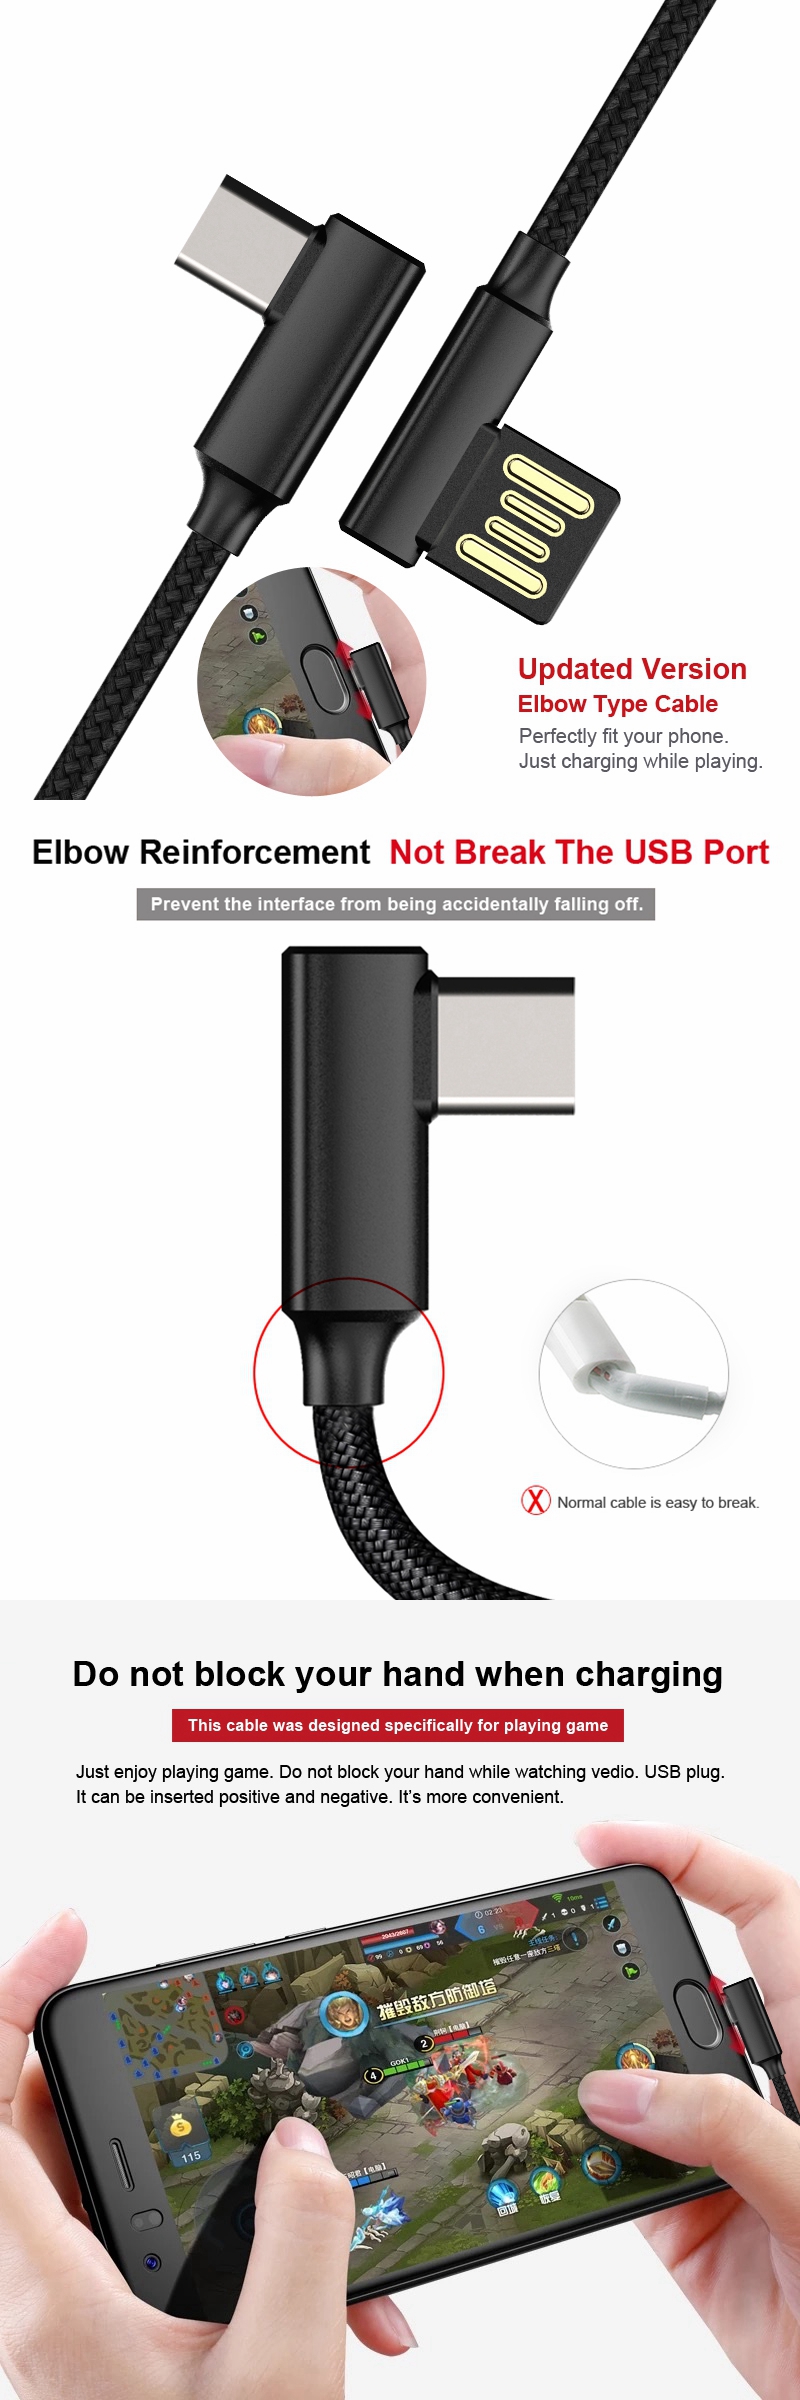 Bakeey 90 Degree Reversible 2.4A Type C Fast Charging Data Cable For Oneplus 5t Xiaomi 6 Mi A1 S8